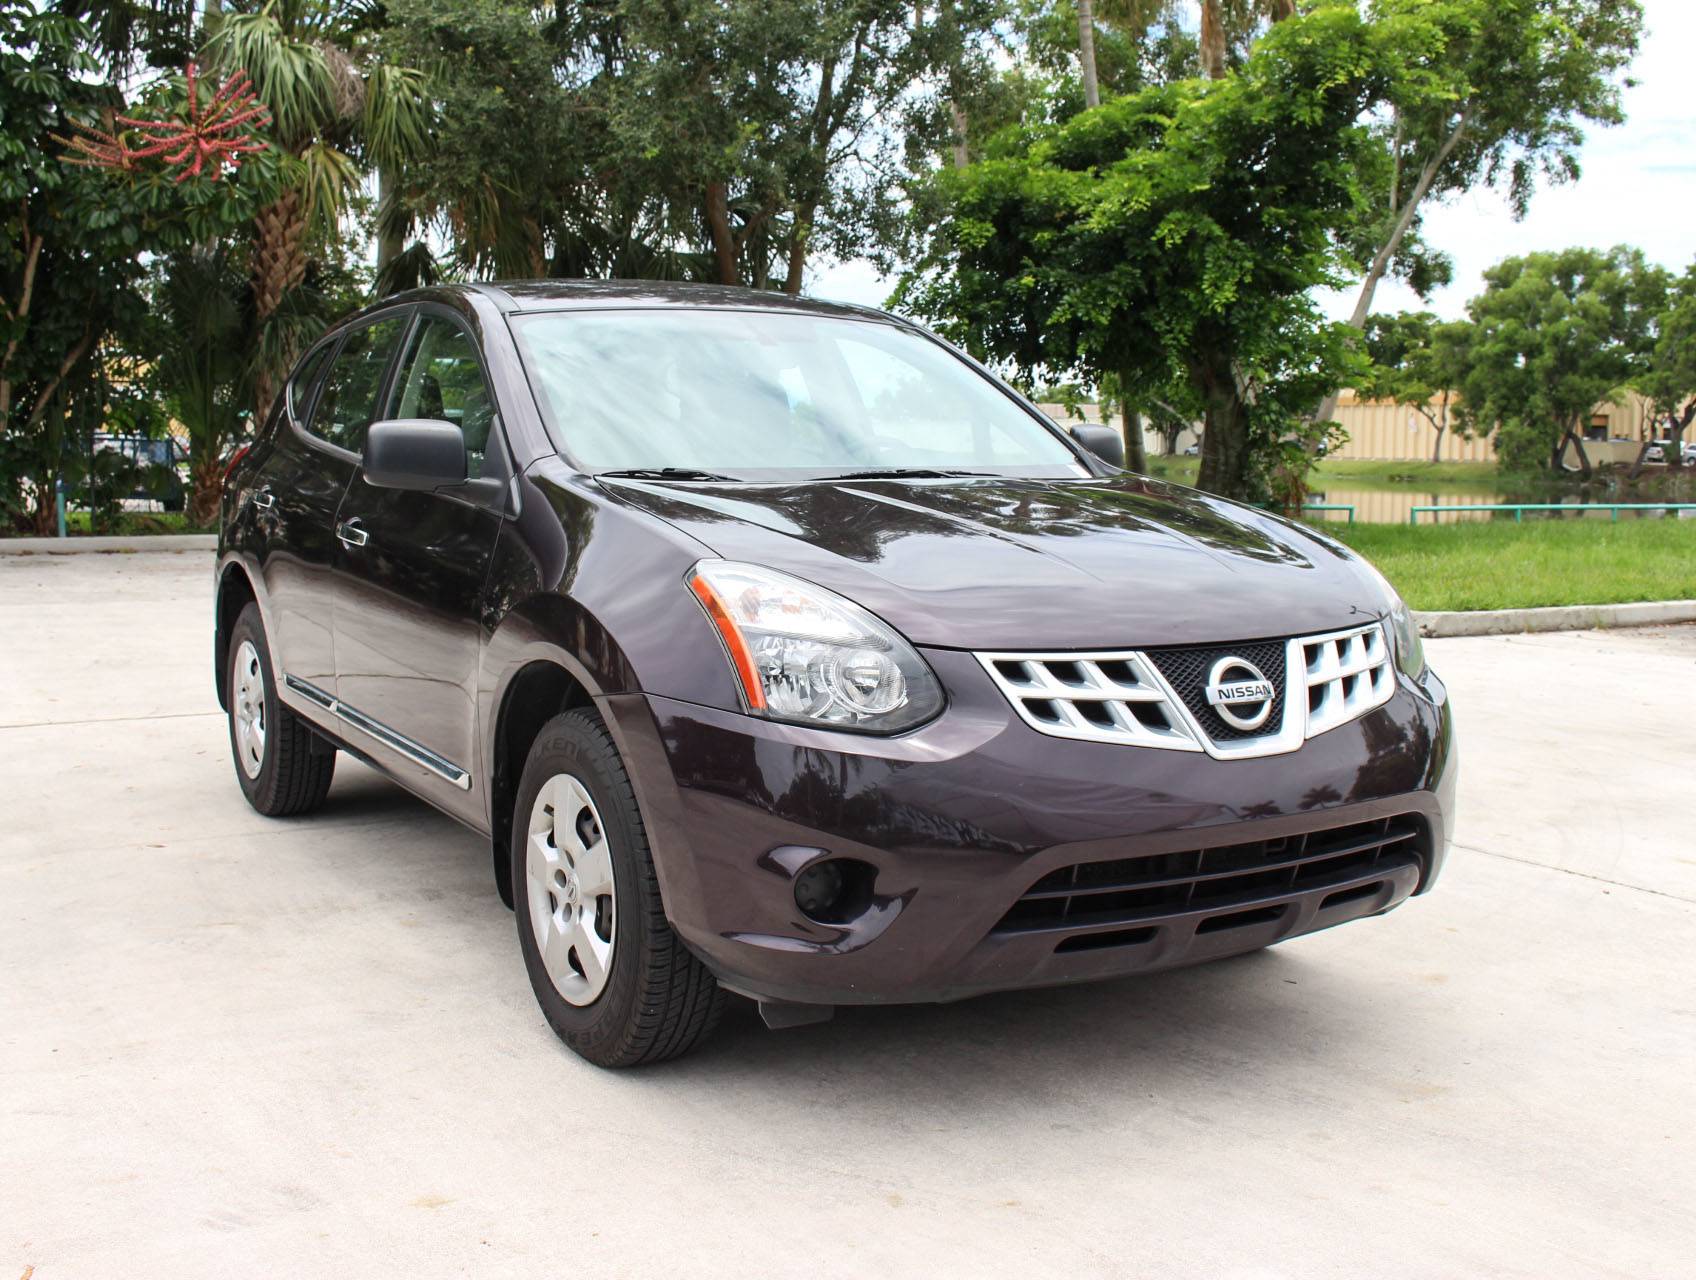 Florida Fine Cars - Used NISSAN ROGUE SELECT 2015 MARGATE S